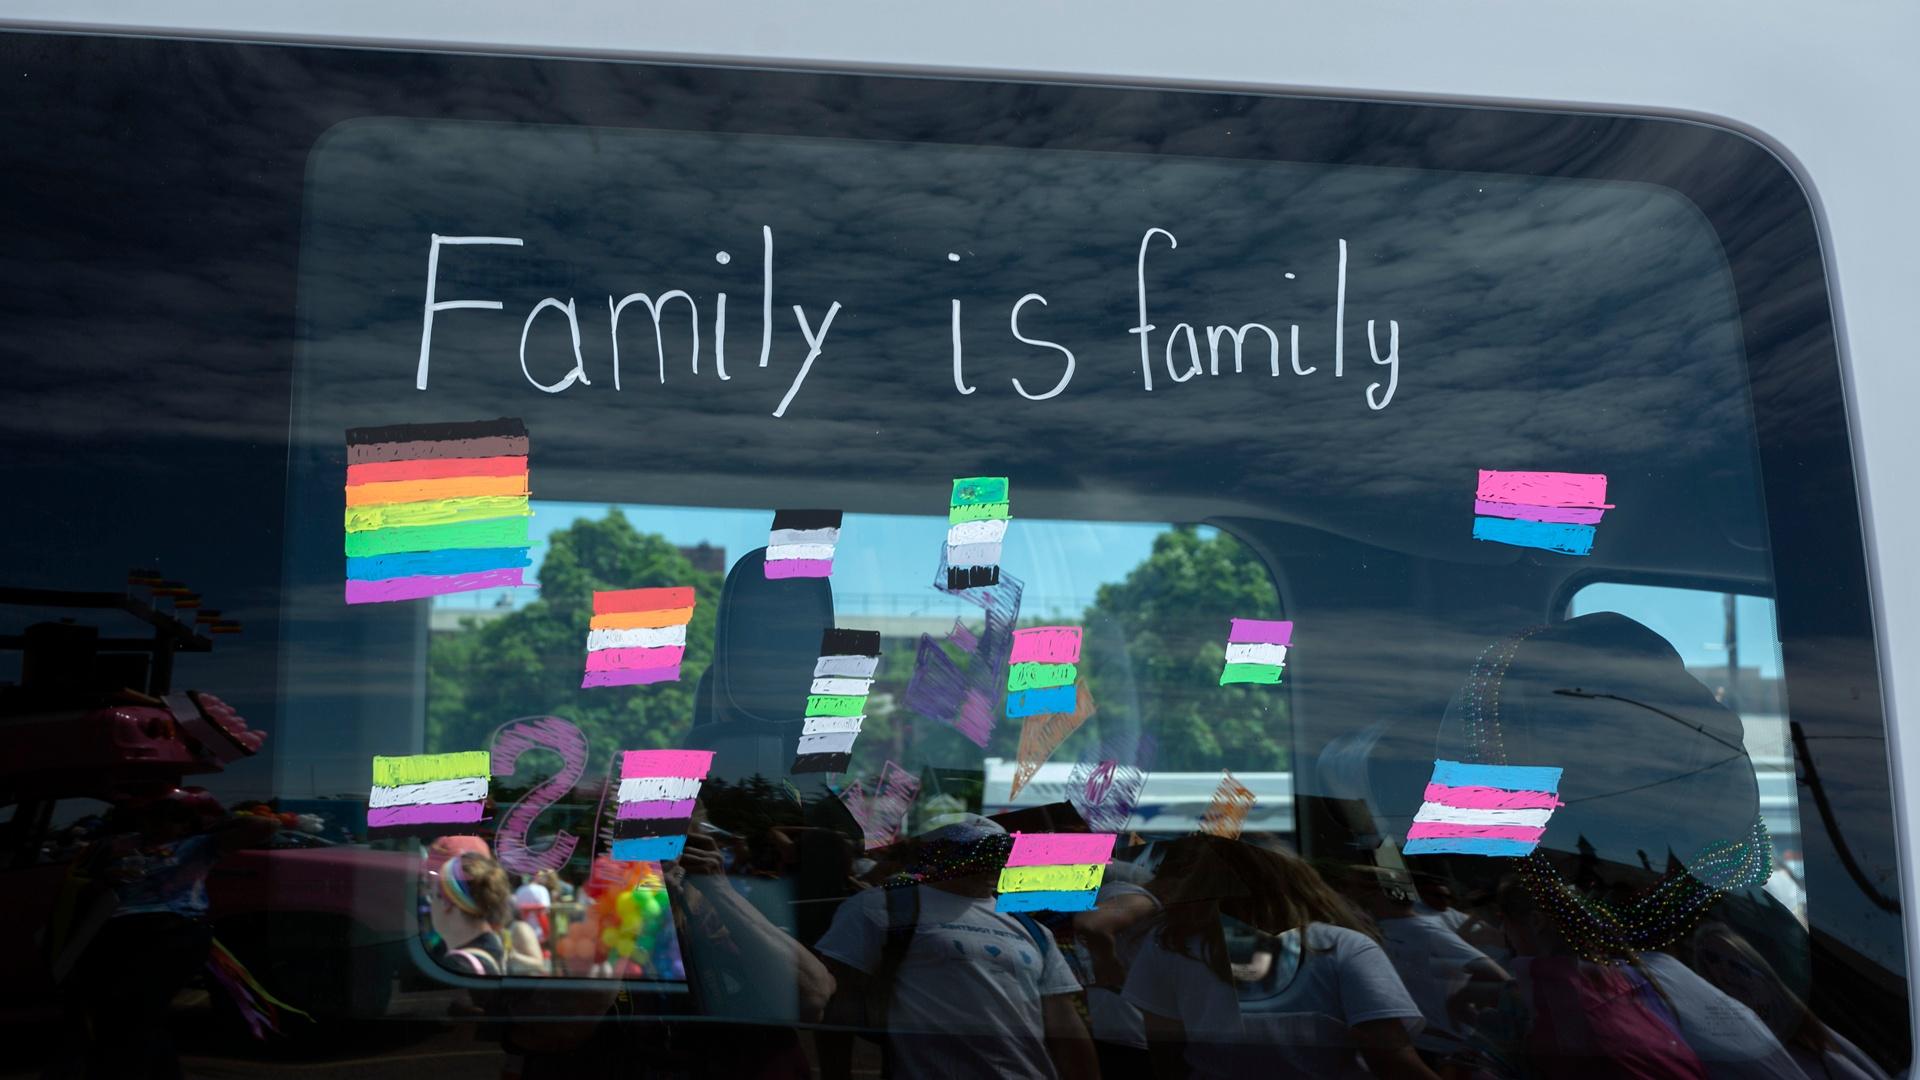 "Family is Family" on car window